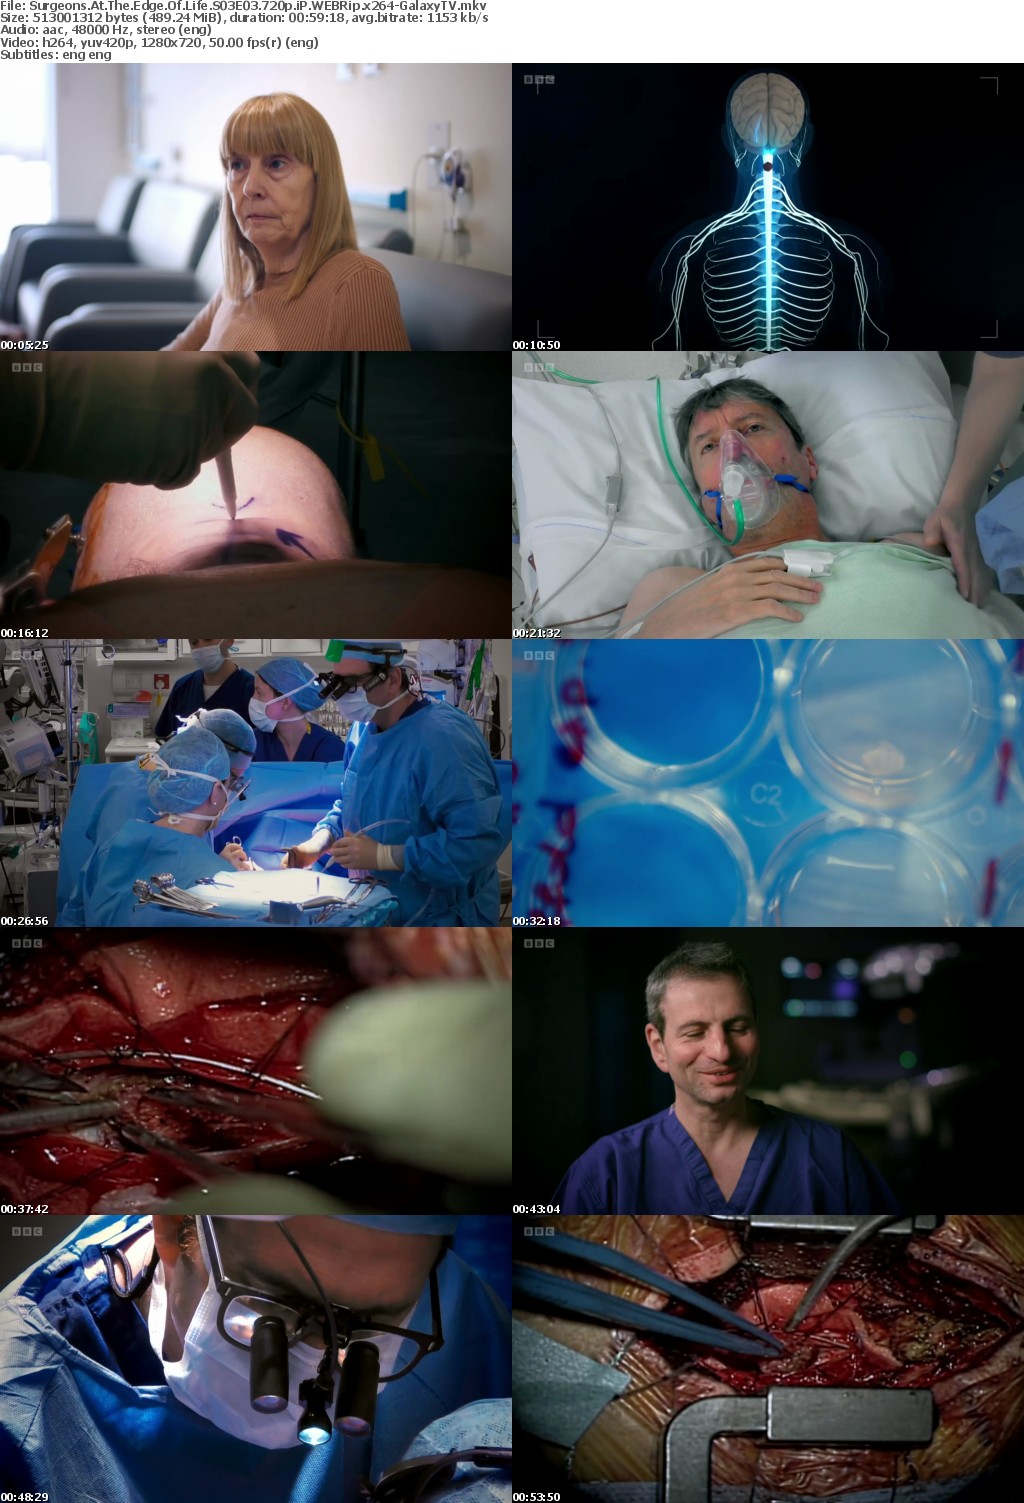 Surgeons At The Edge Of Life S03 COMPLETE 720p iP WEBRip x264-GalaxyTV